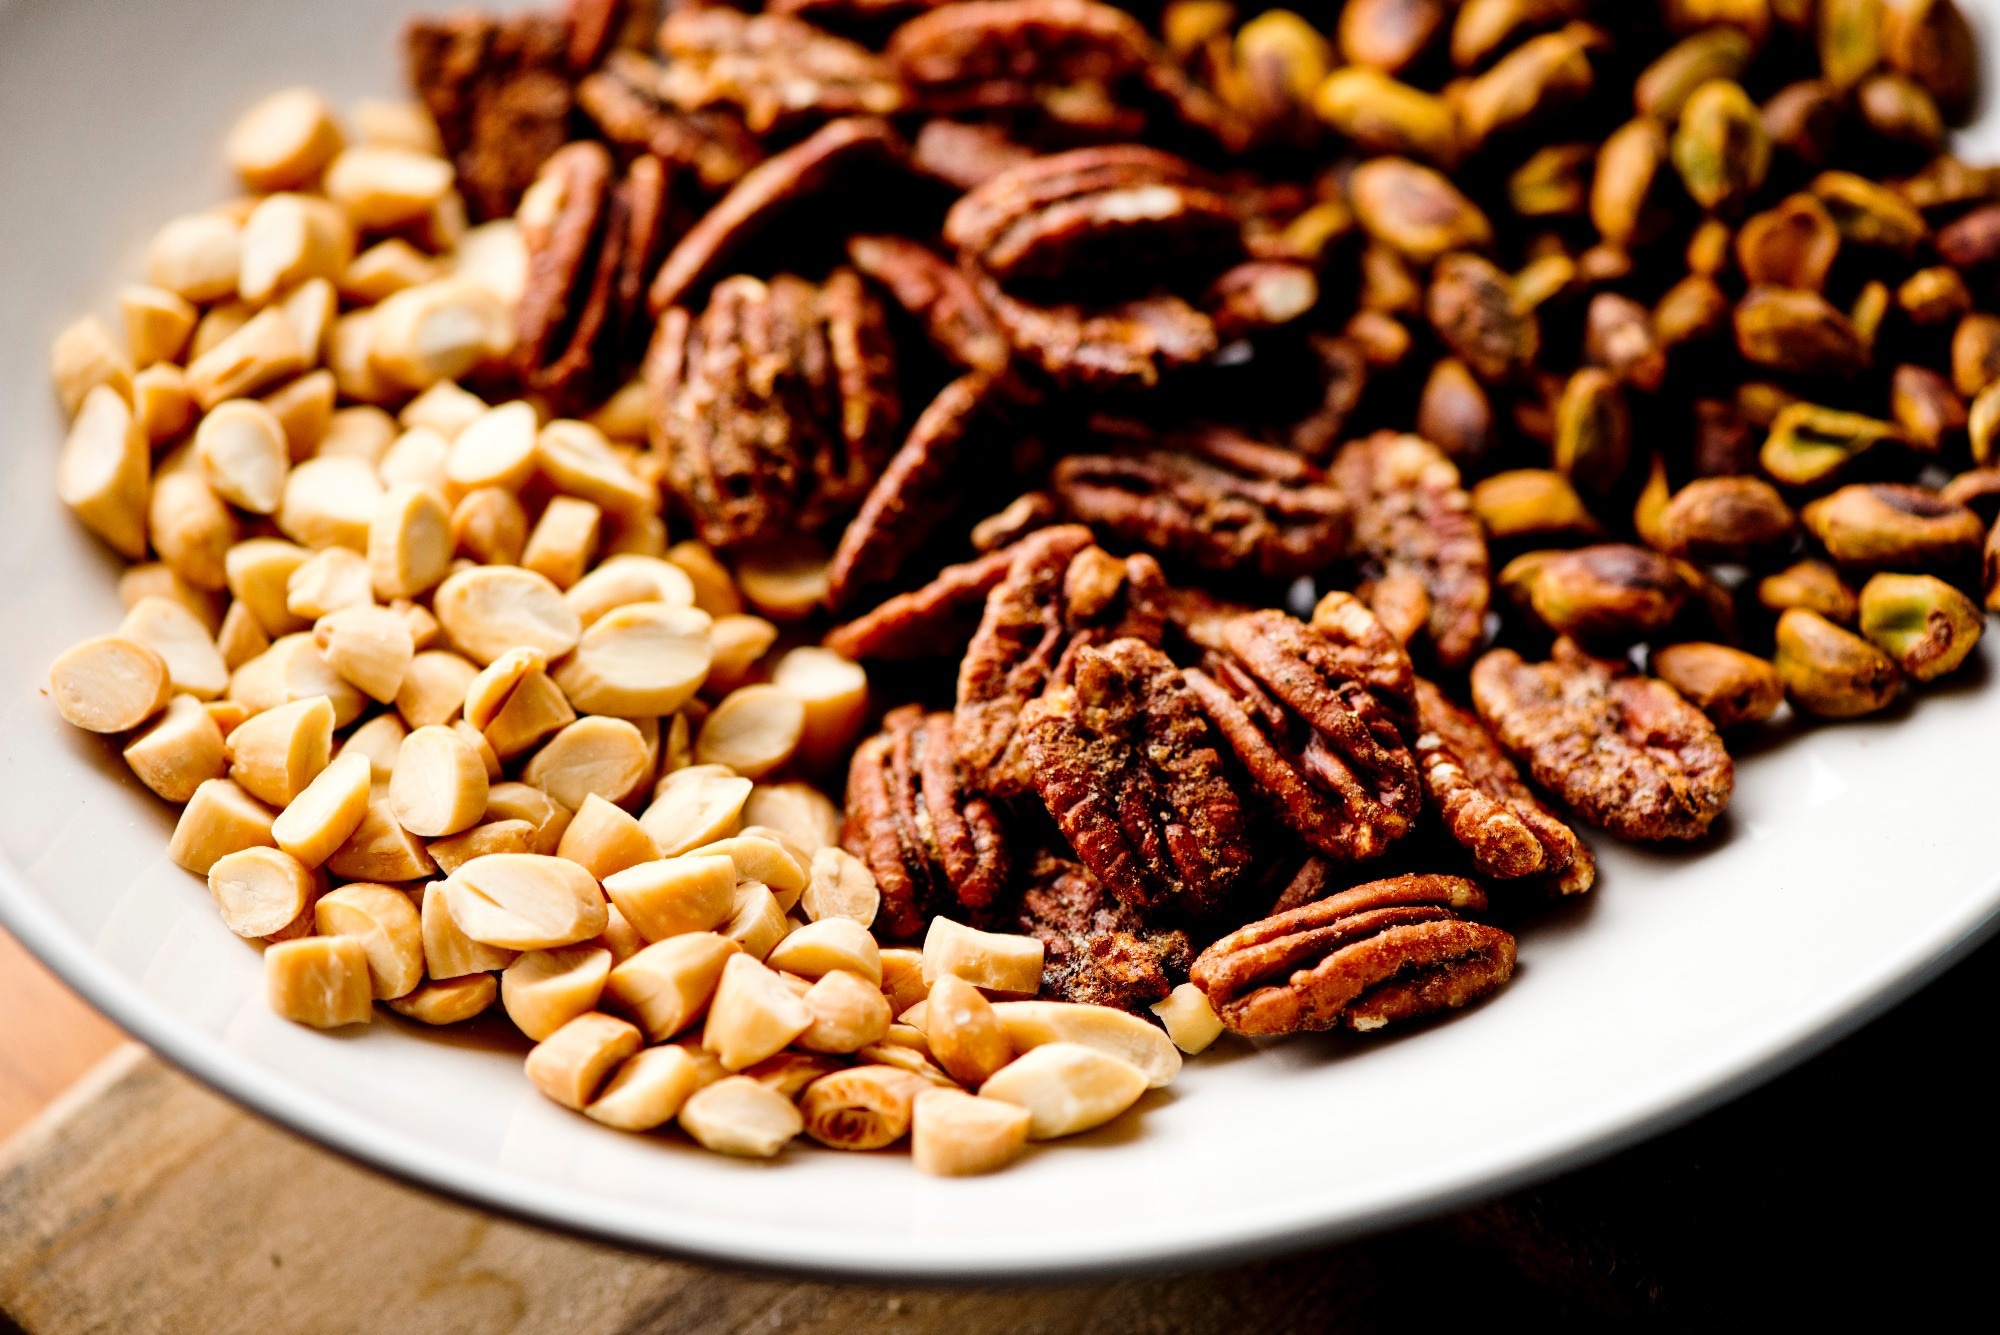 Nut consumption linked to improved male fertility, systematic evaluate reveals